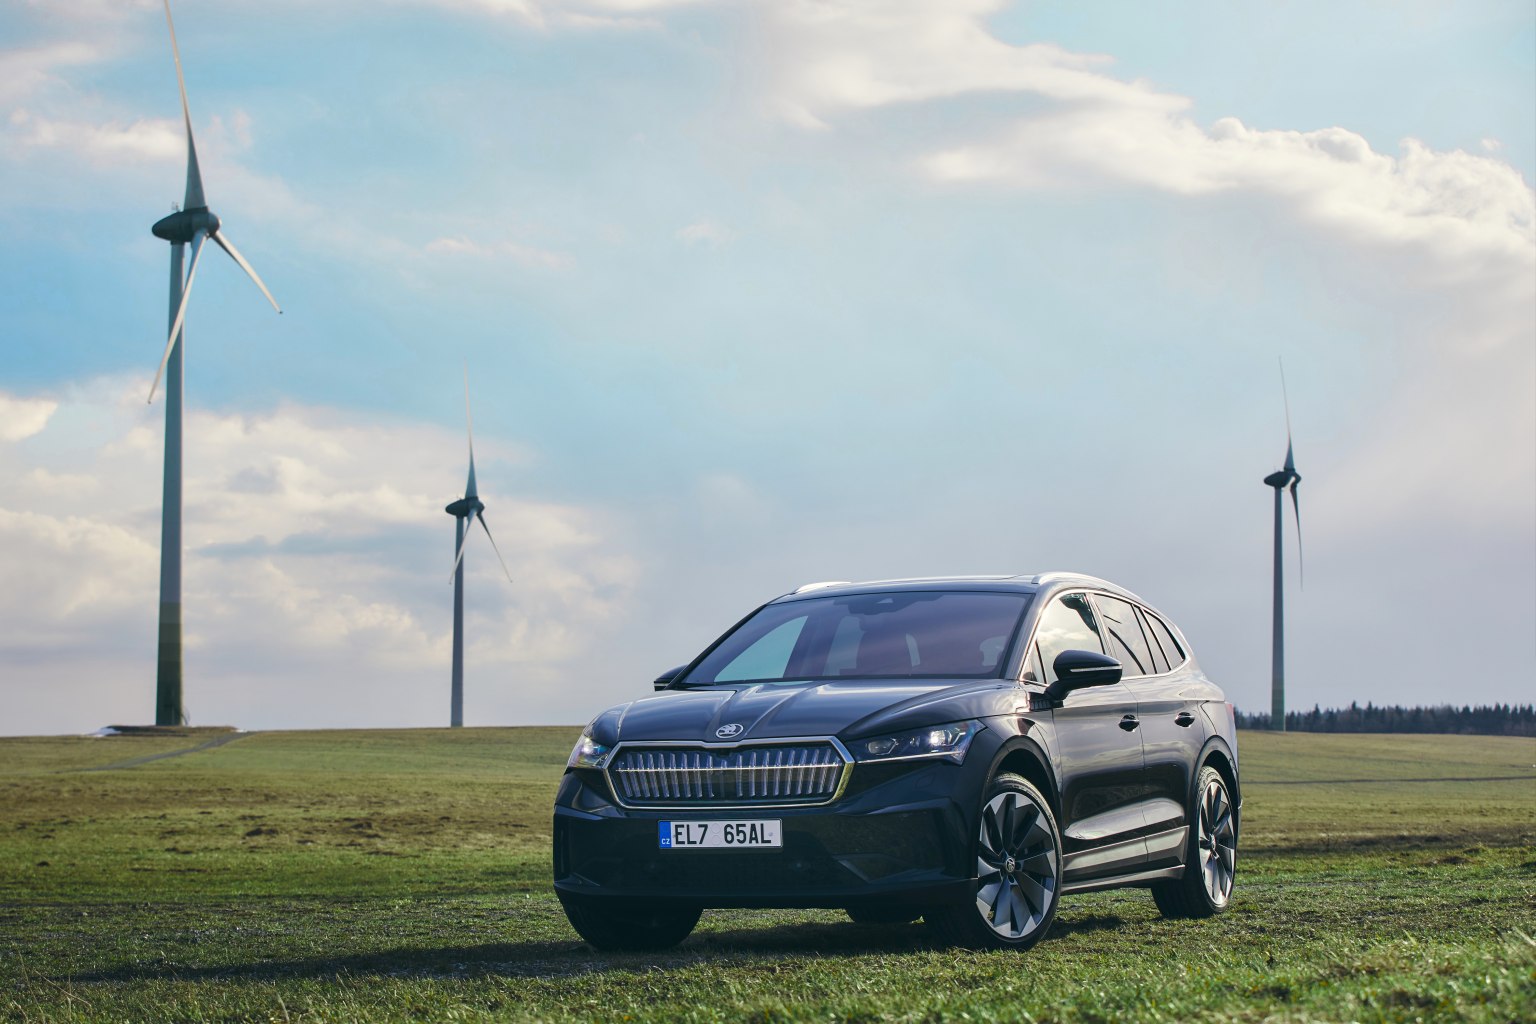 ŠKODA AUTO delivers the ENYAQ iV to customers with a carbon-neutral balance sheet